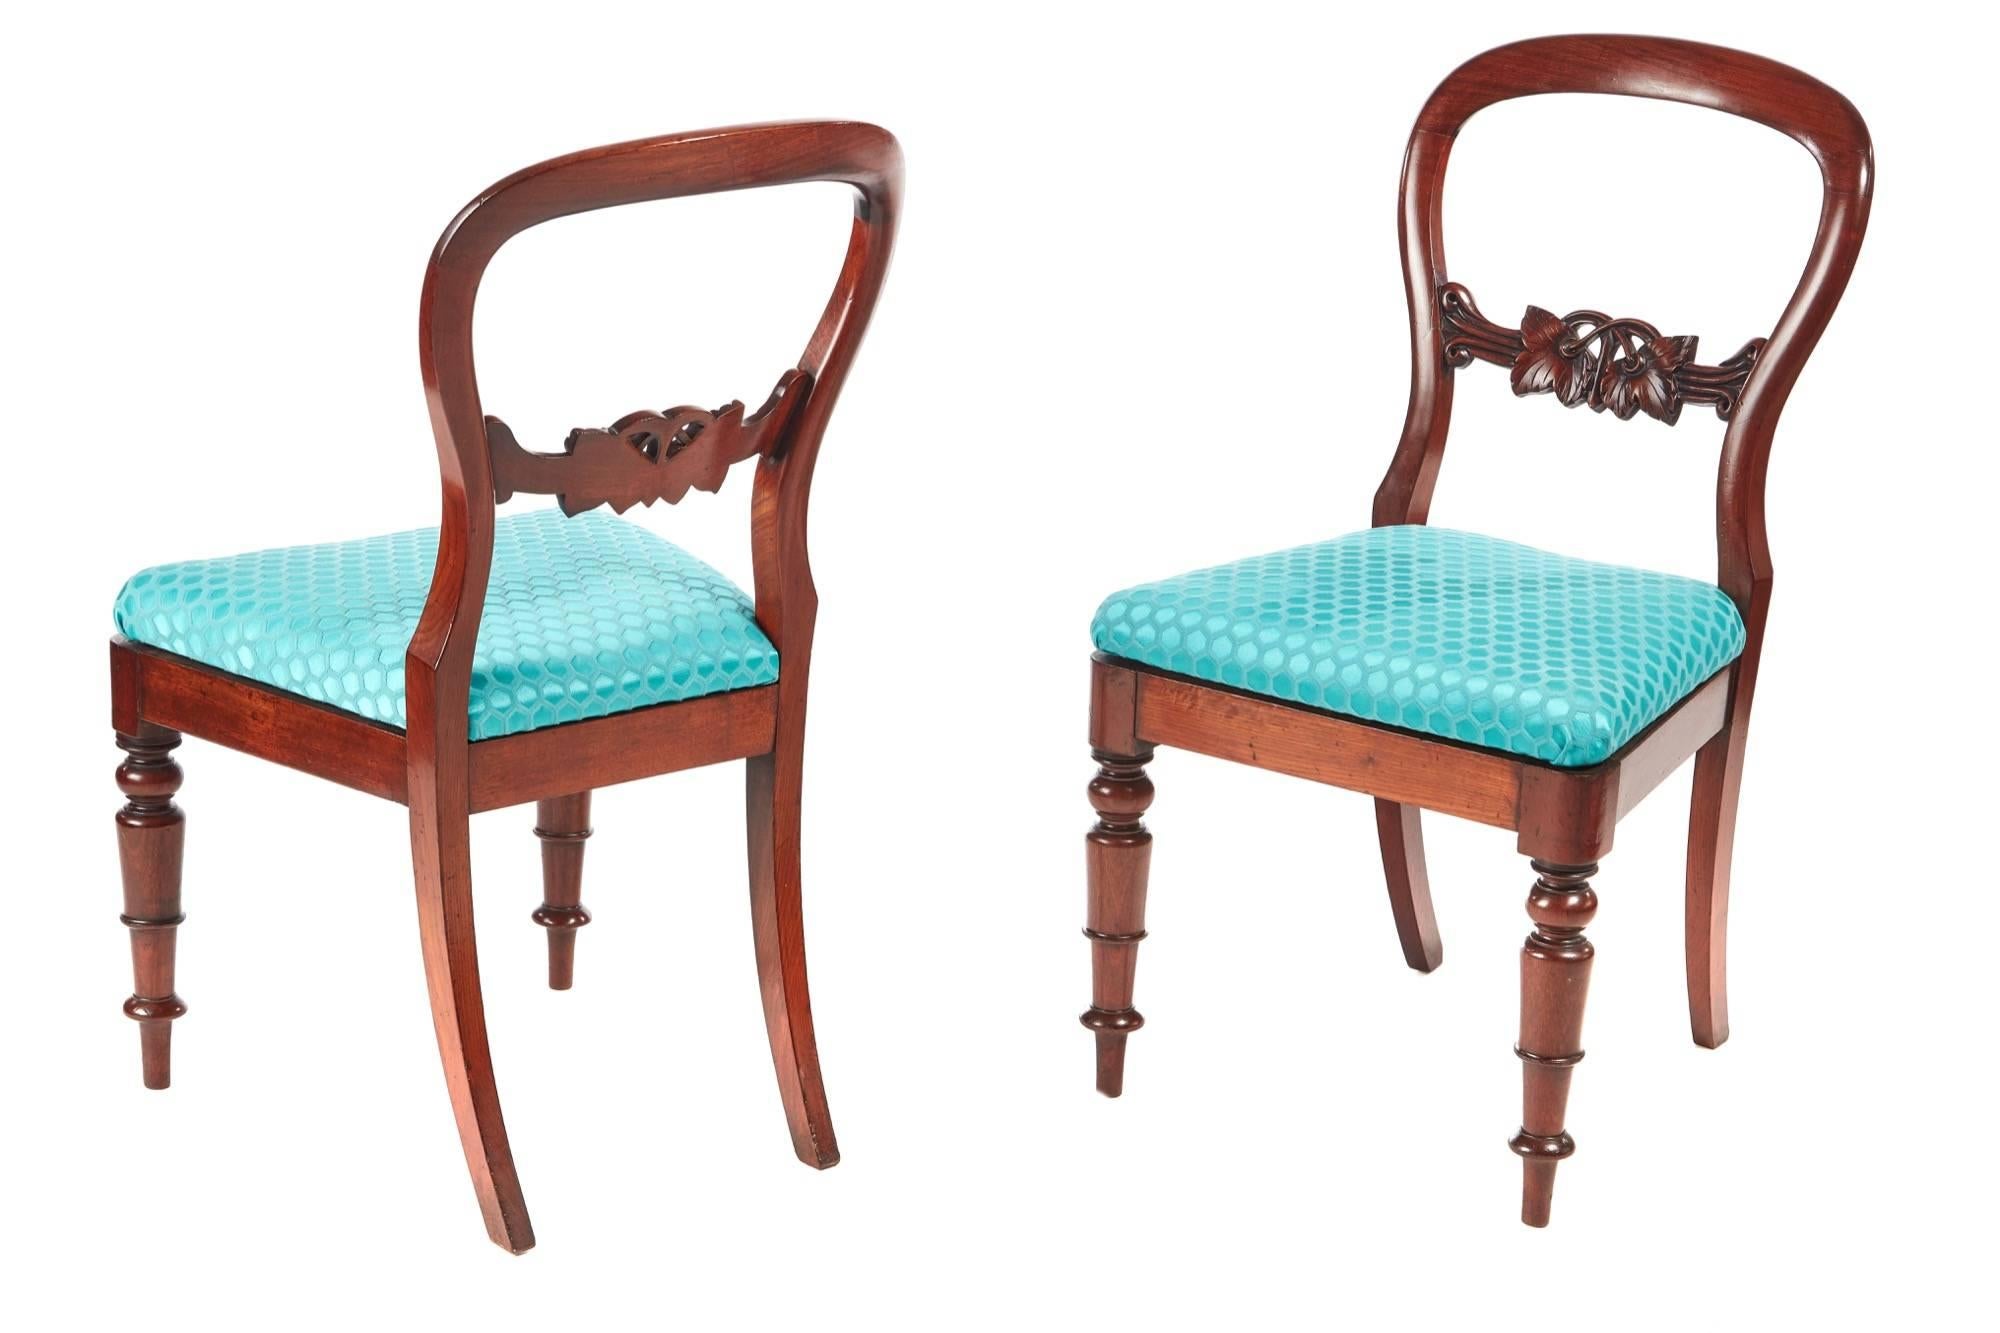 Set of four quality Victorian mahogany balloon back dining chairs, with a lovely shaped back carved lower rail, standing on turned legs to the front outswept back legs
Newly re-upholstered drop in seats
Lovely color and condition
Measure: 19